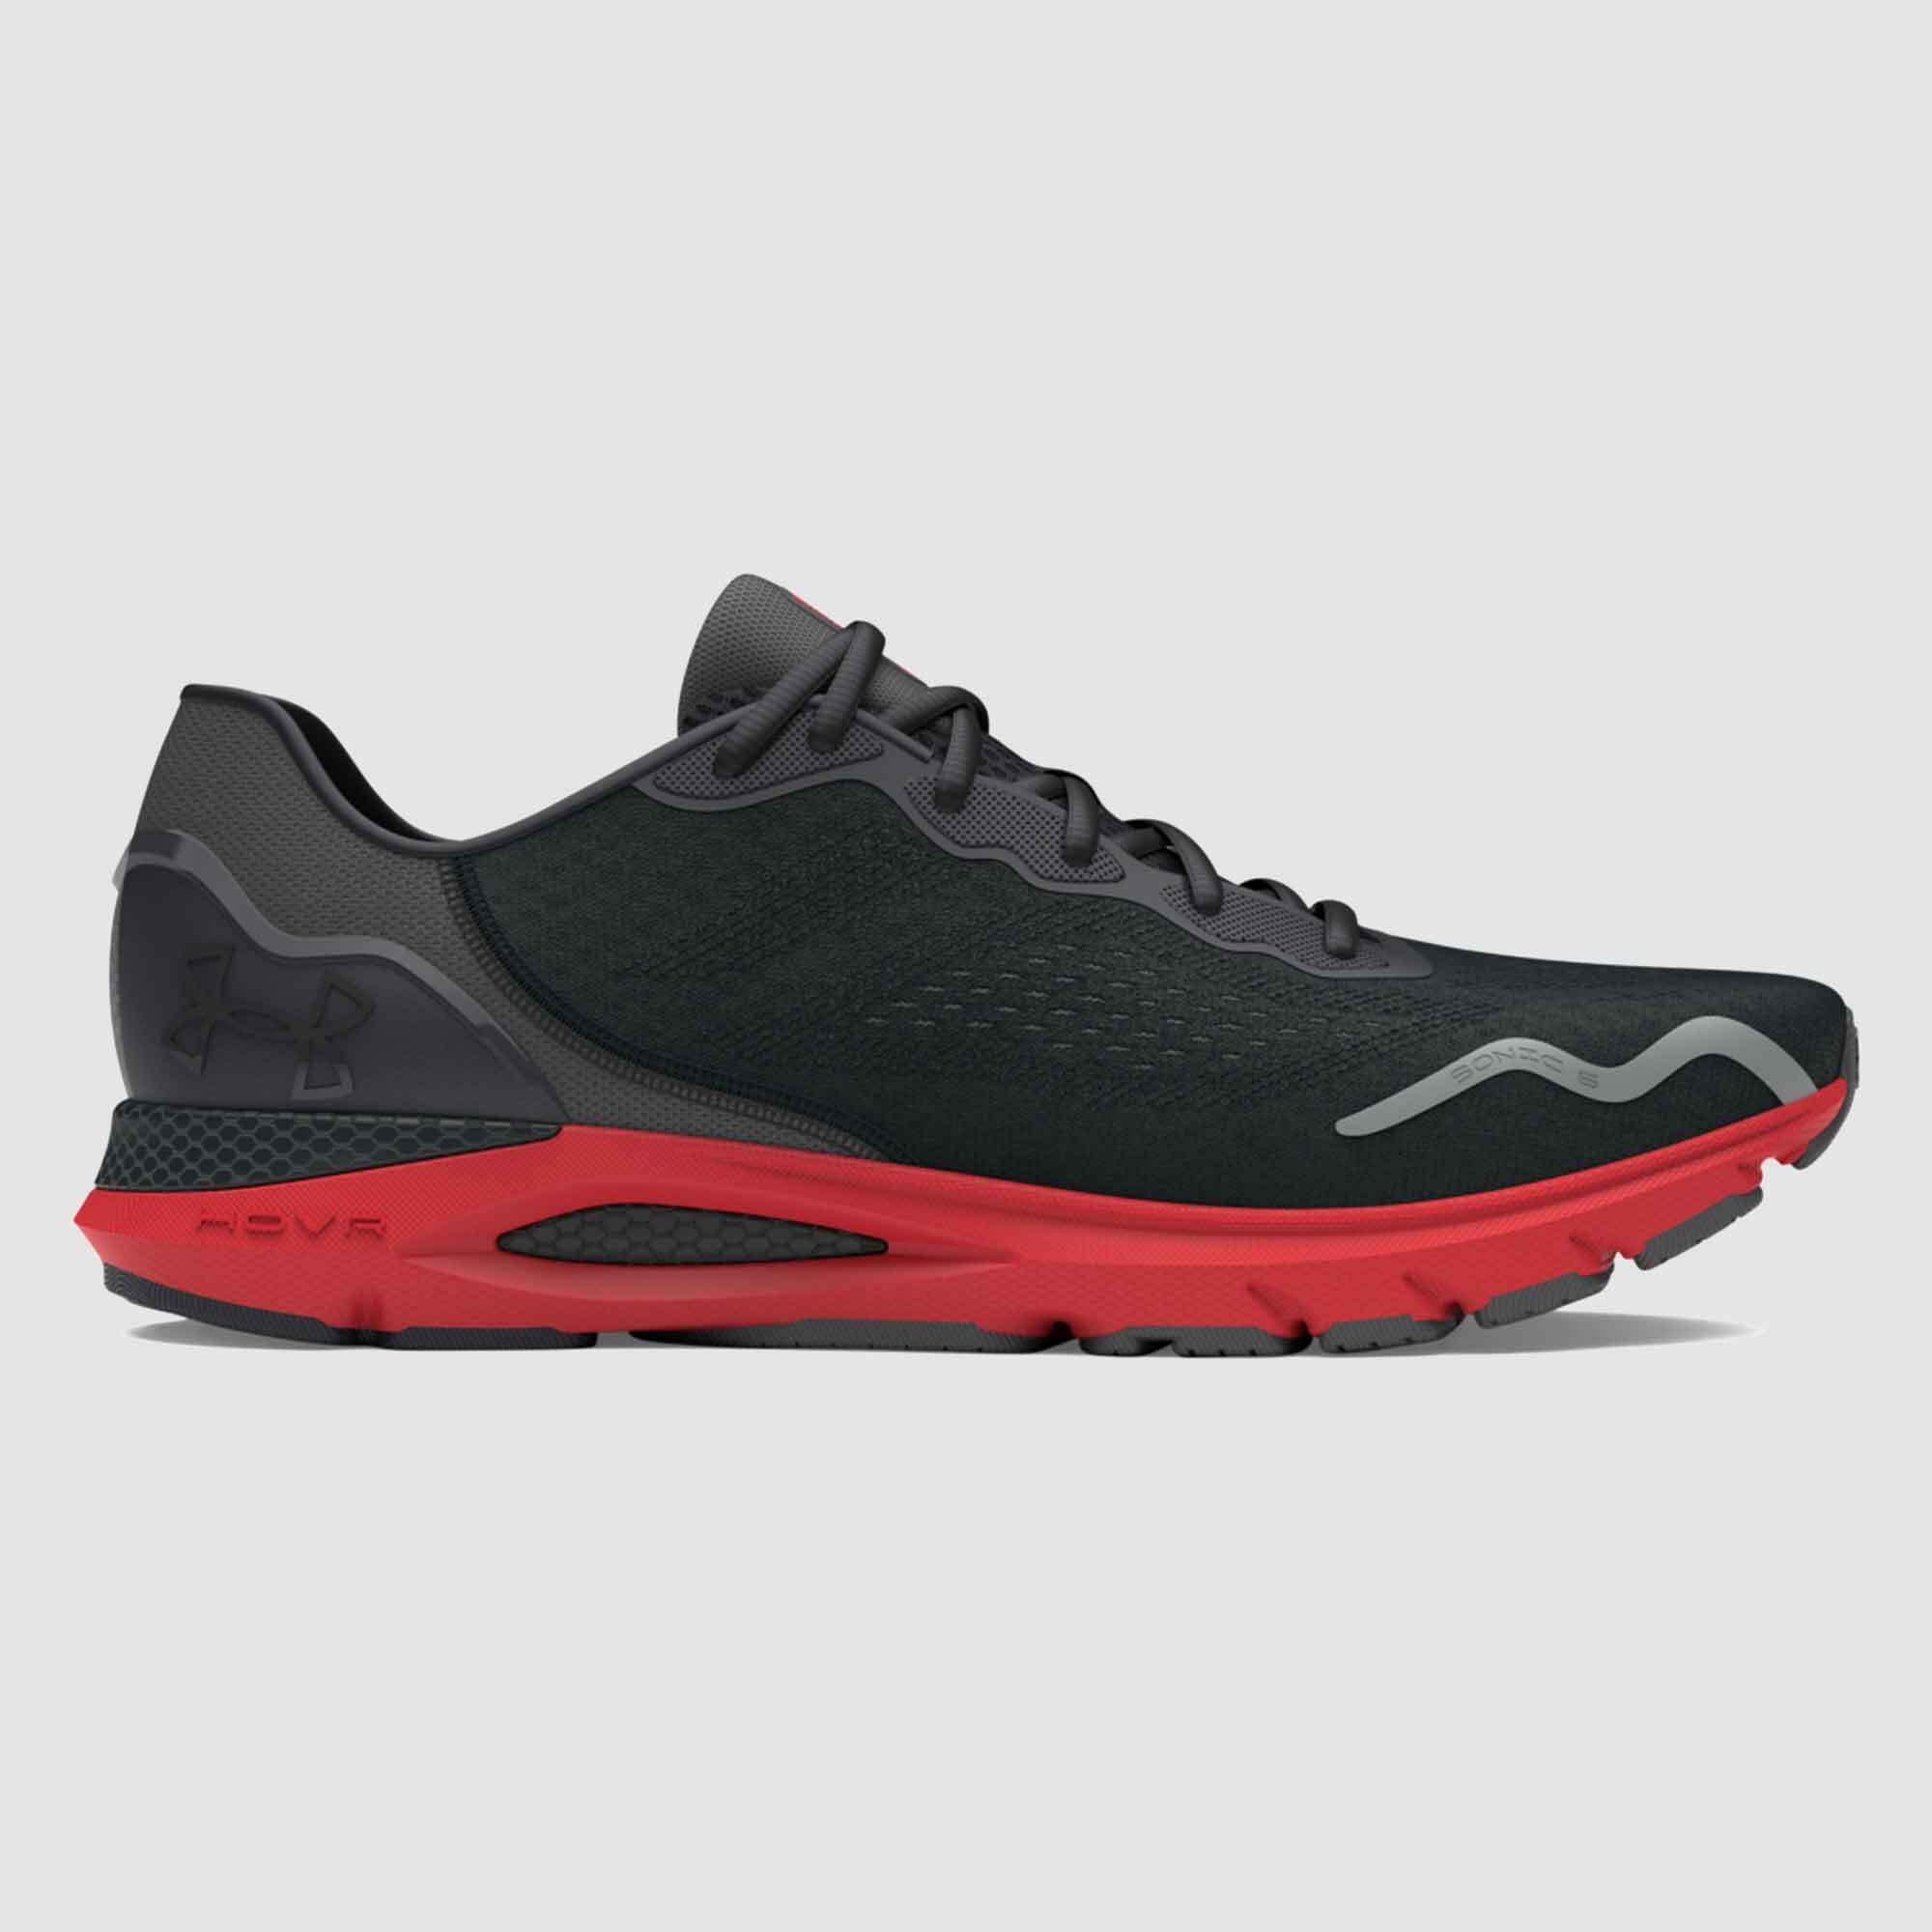 Under Armour Mens HOVR Sonic 6 Running Shoes